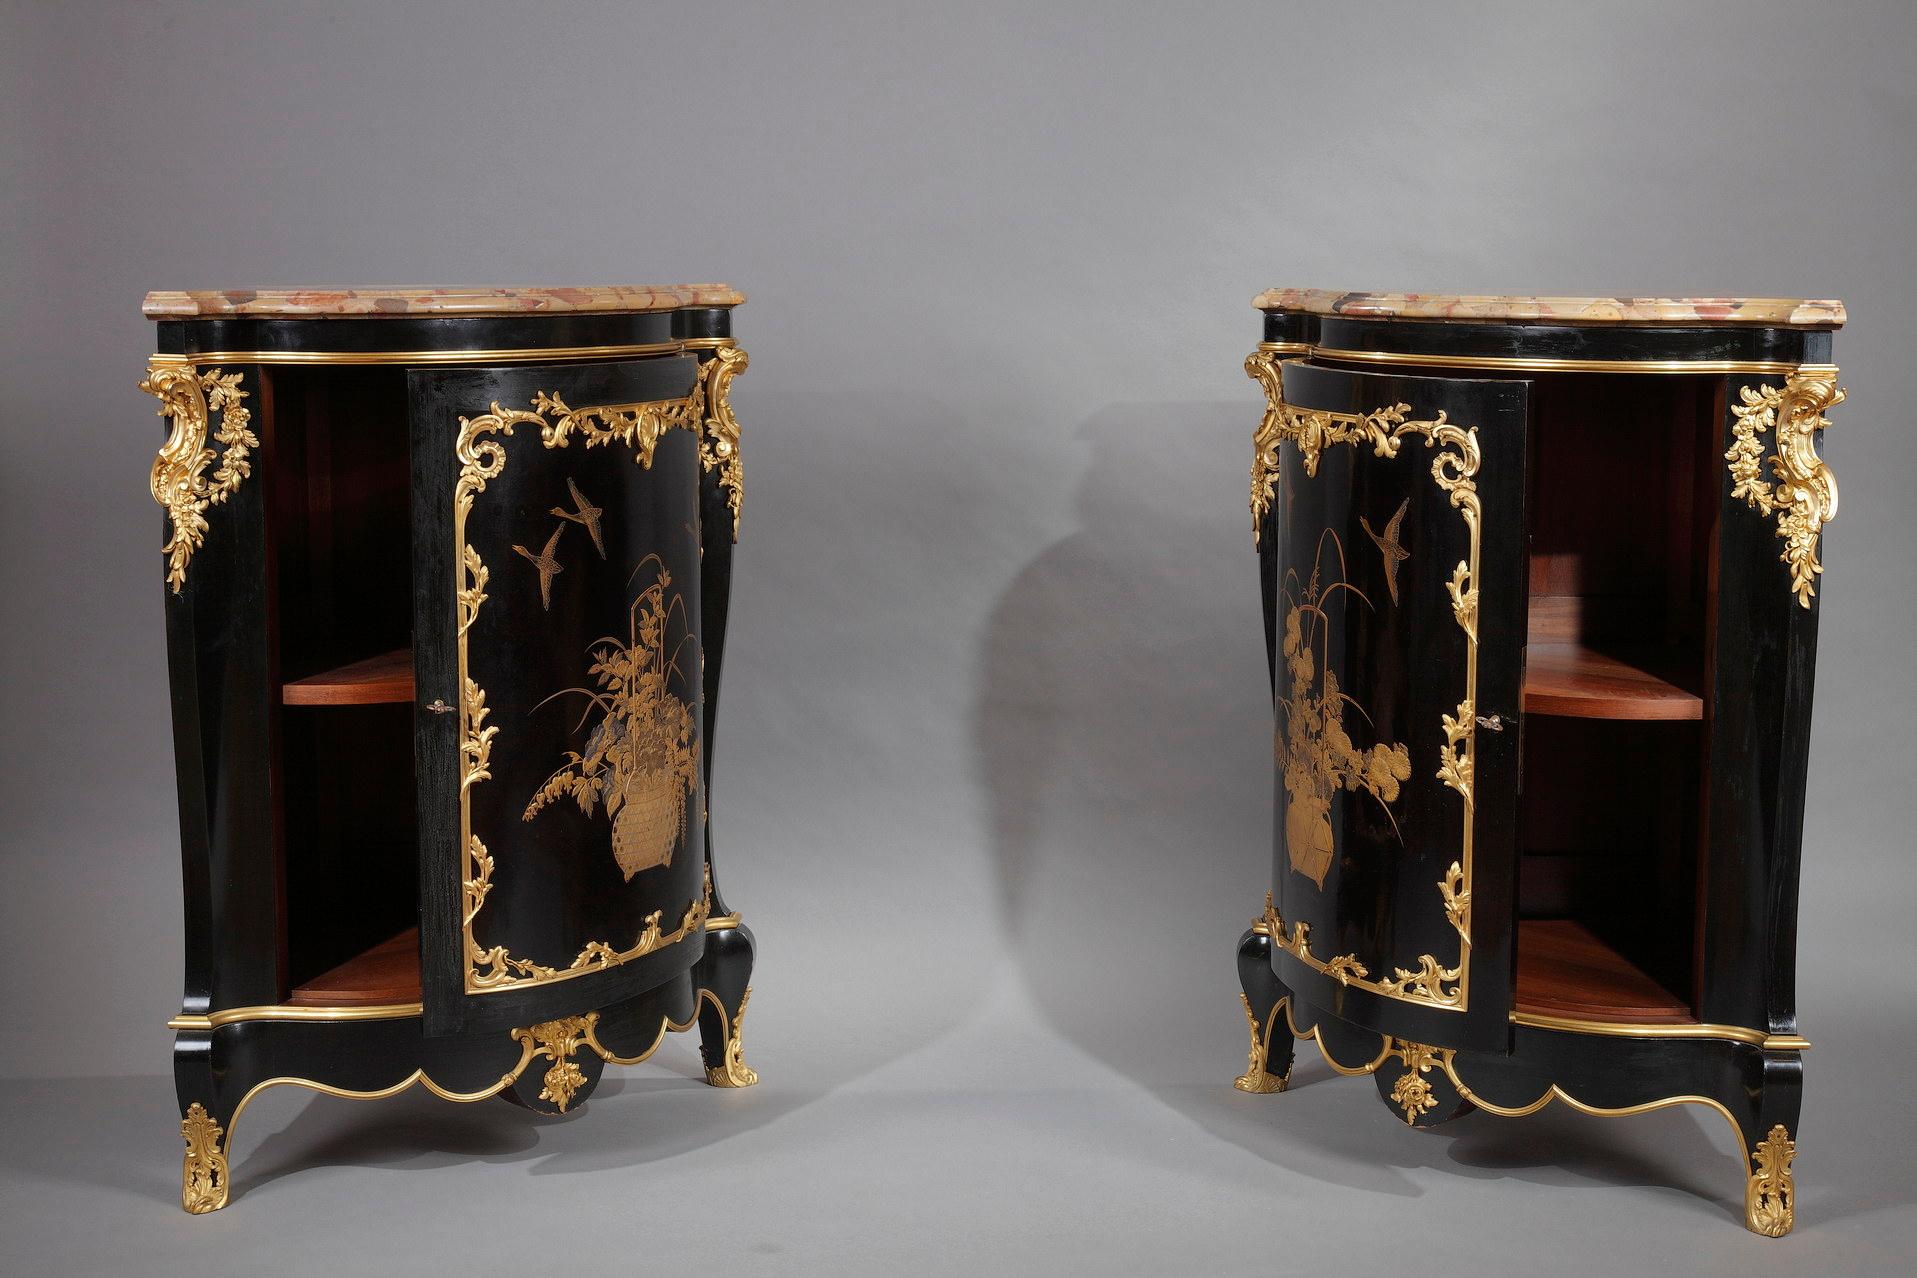 Pair of Lacquered Wood Encoignures, by A.E. Beurdeley, France, Circa 1890 For Sale 3